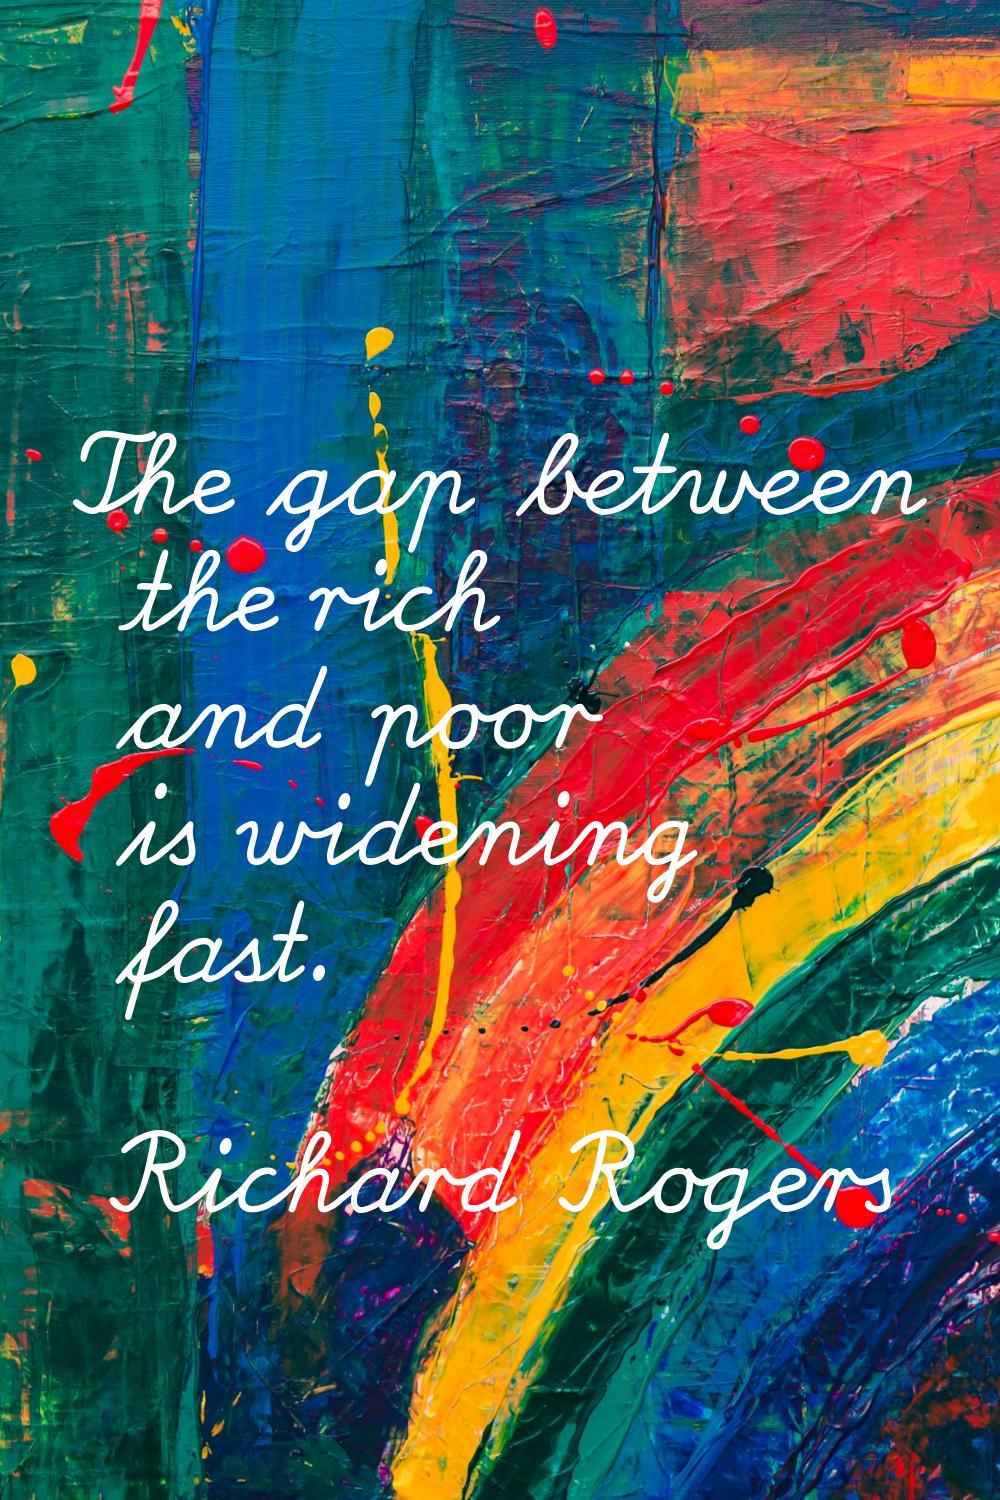 The gap between the rich and poor is widening fast.